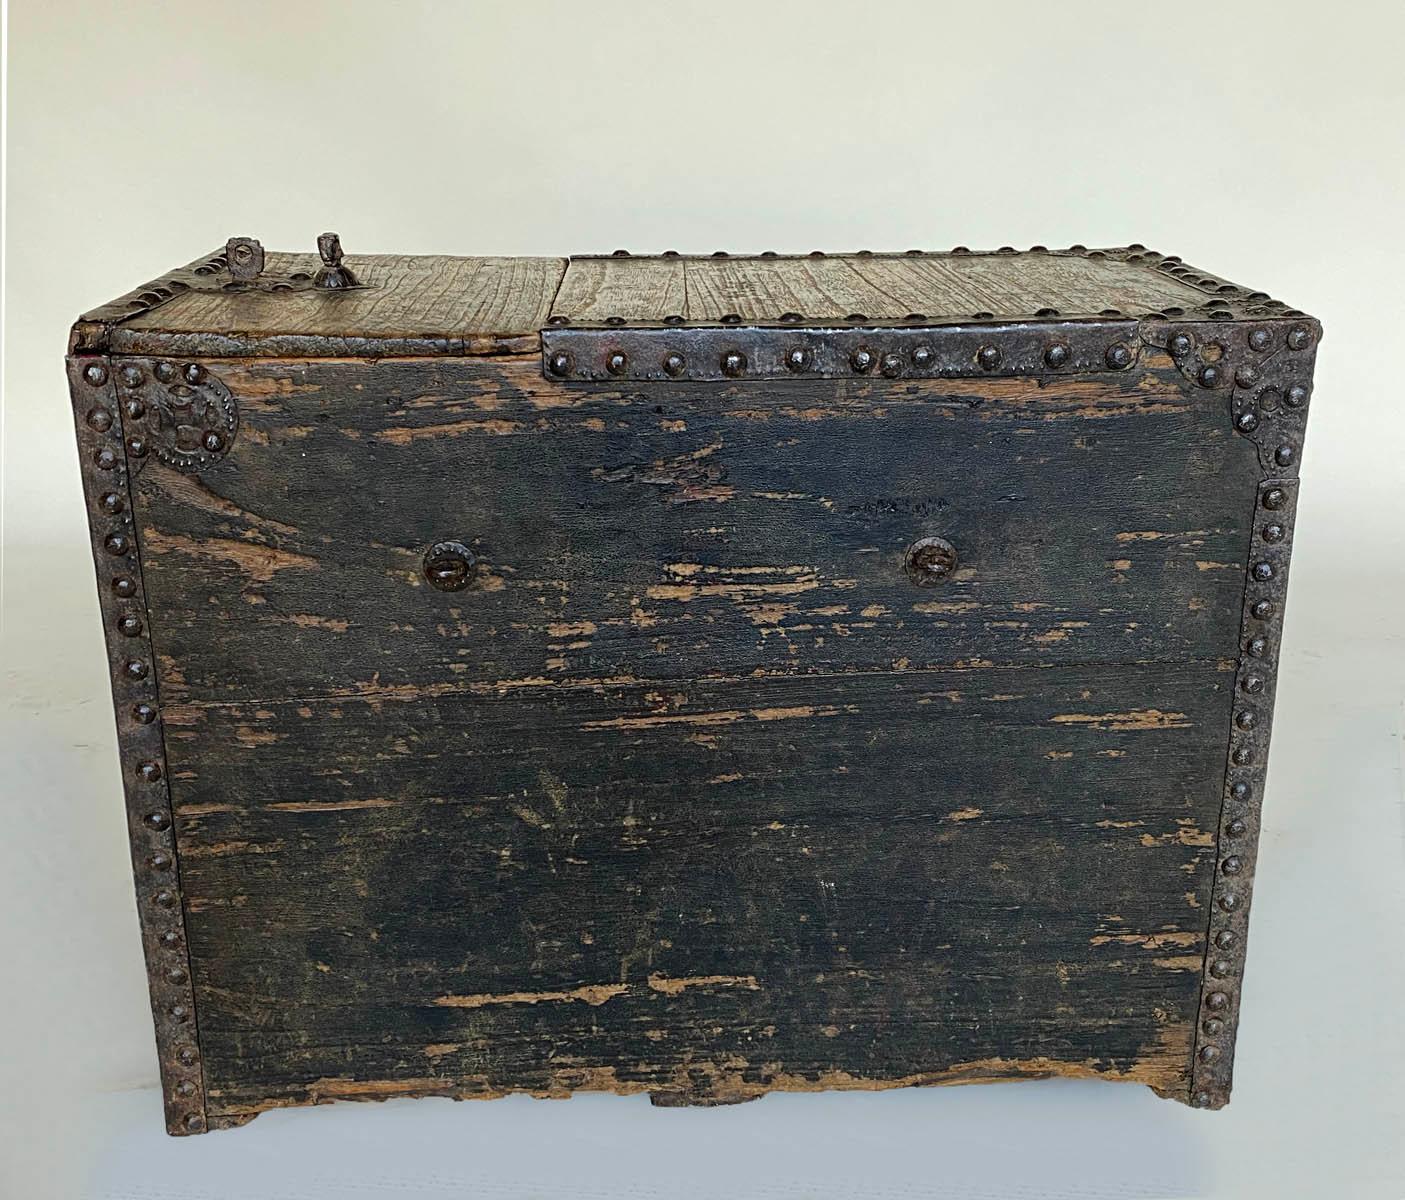 Rustic Early 19th Century Japanese Shop Box